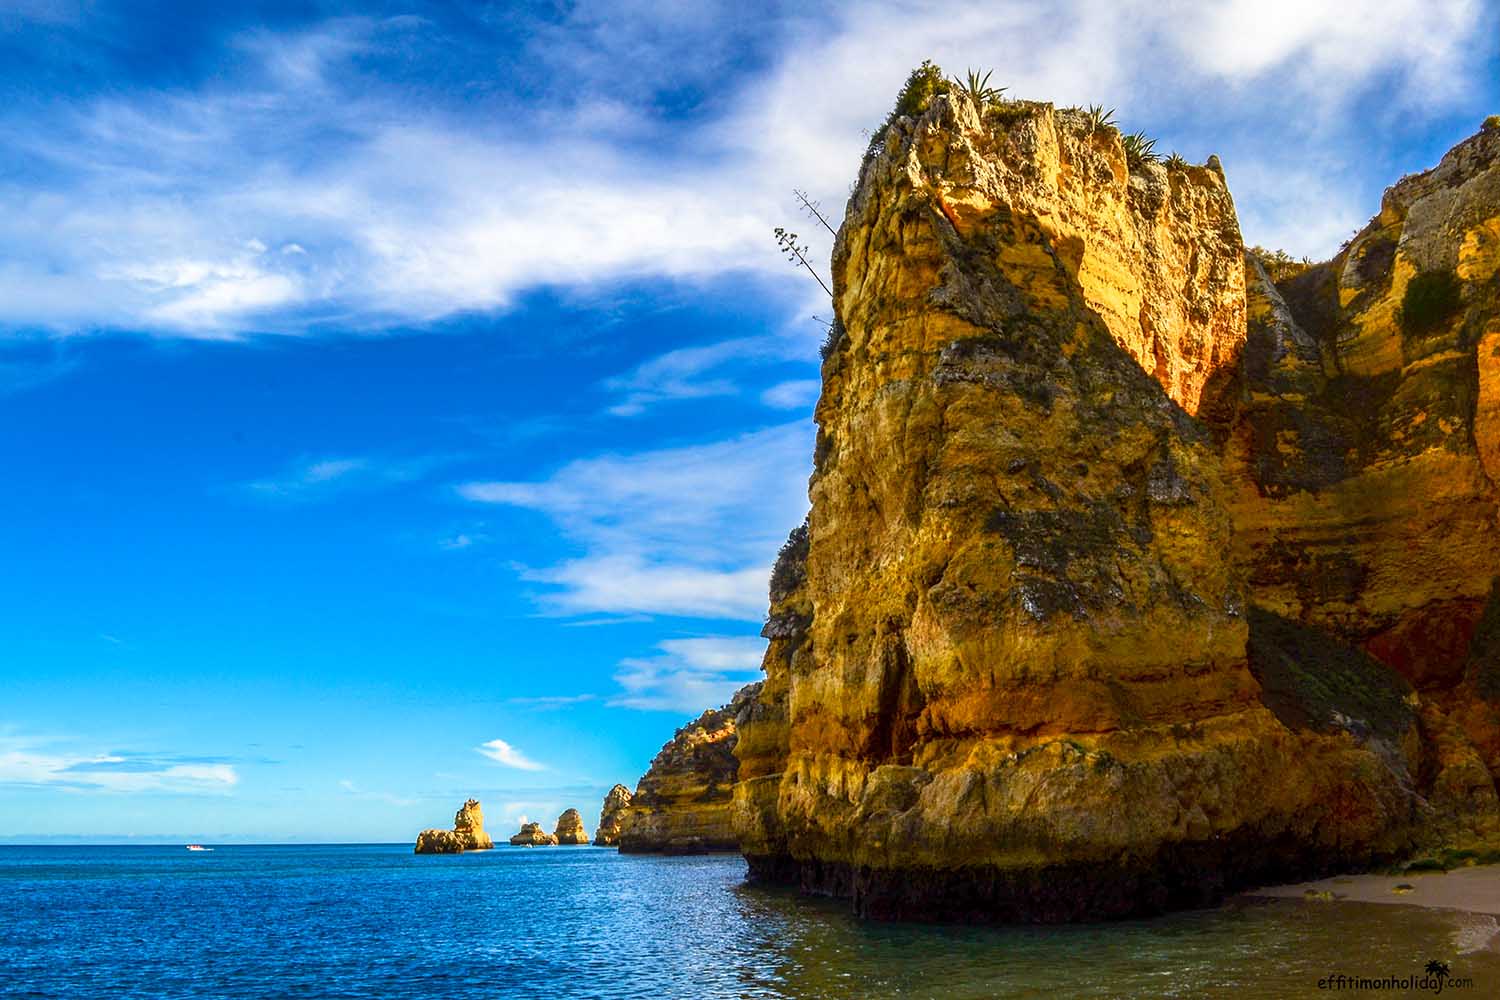 Lagos, Portugal shouldn't be missed this summer if you love gorgeous beaches and clean blue waters